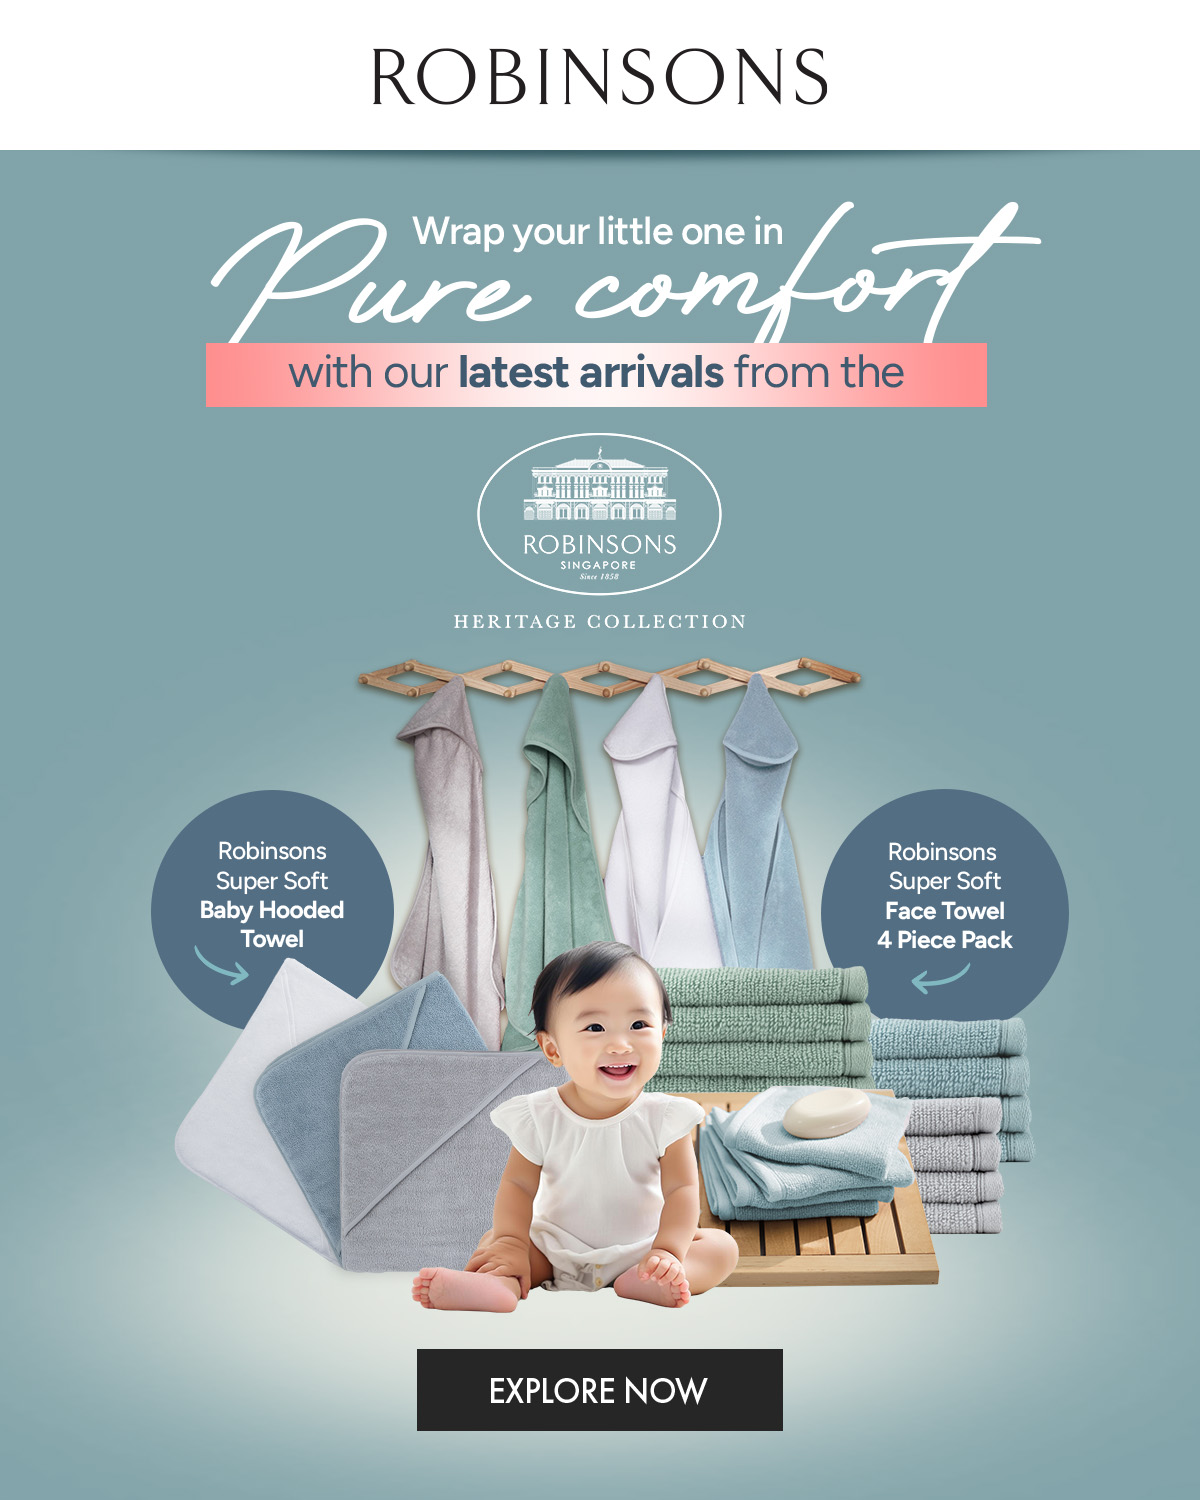 Wrap your little one in pure comfort with our latest from Robinsons Heritage Collection